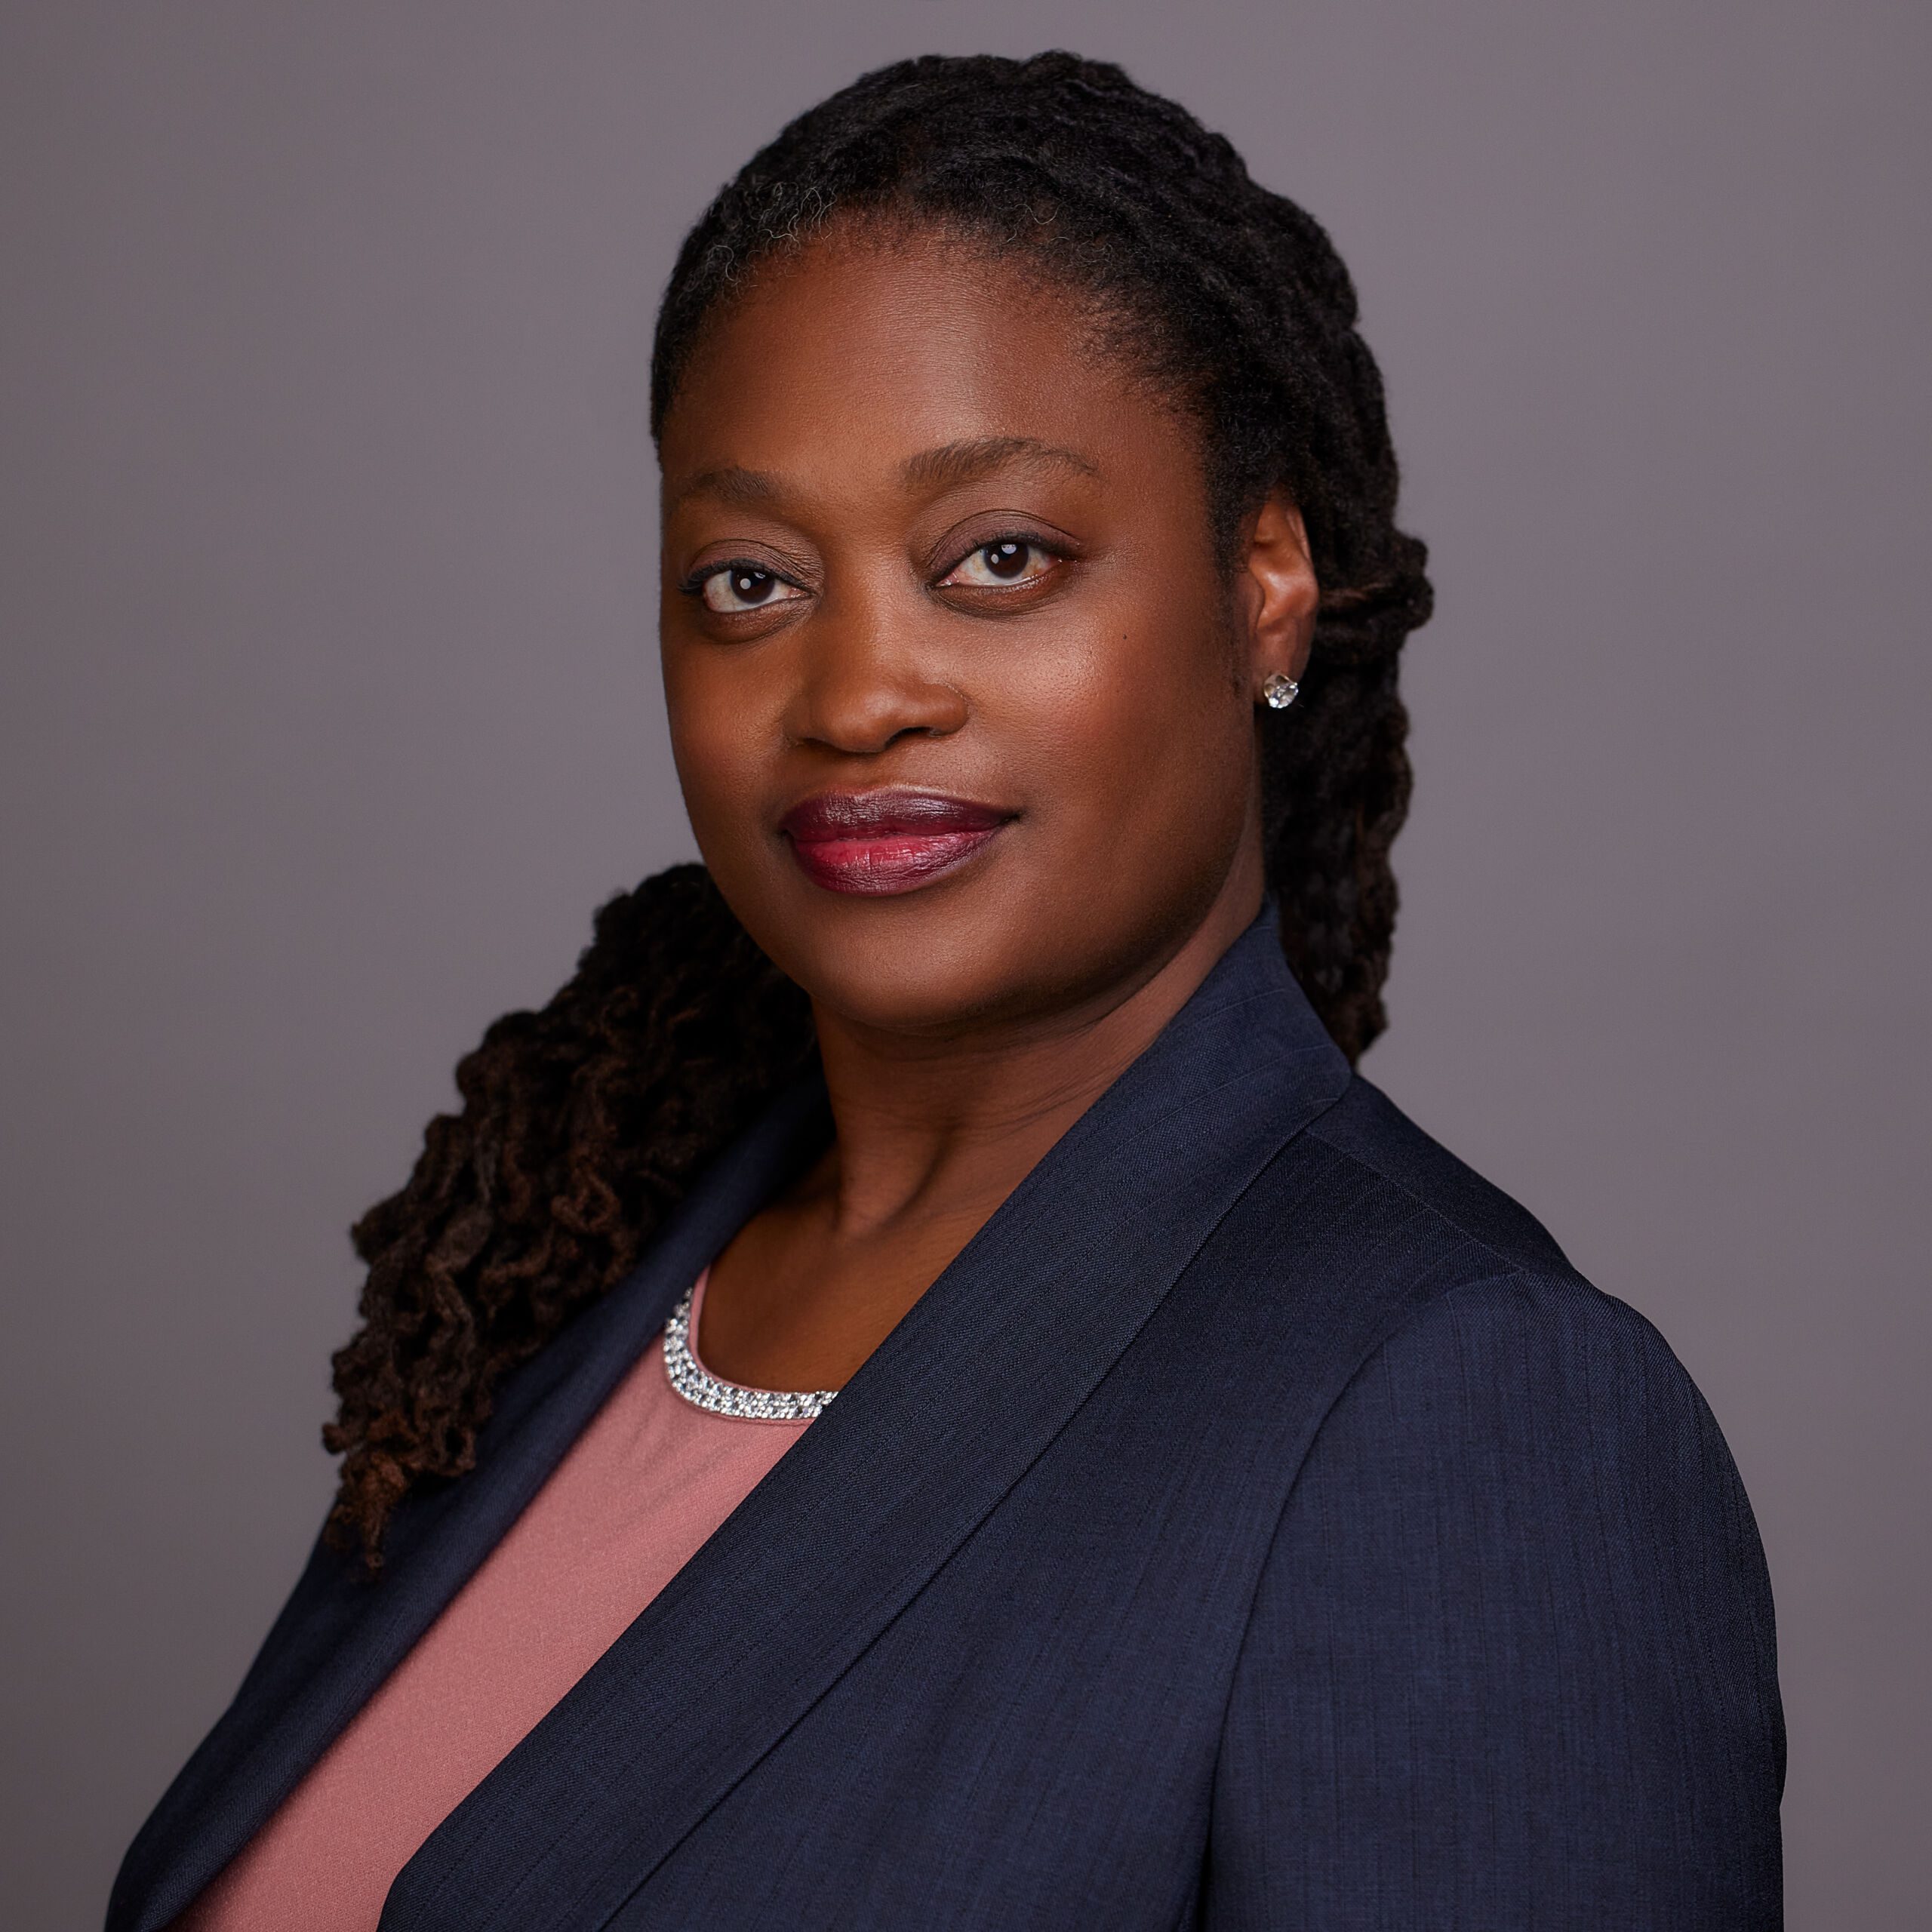 Photo shows a professional headshot of Tina Ellis, principal of DRW College Prep. She is a Black woman with long black hair. She is wearing a pink blouse with a navy blazer. There is a blank gray background behind her.